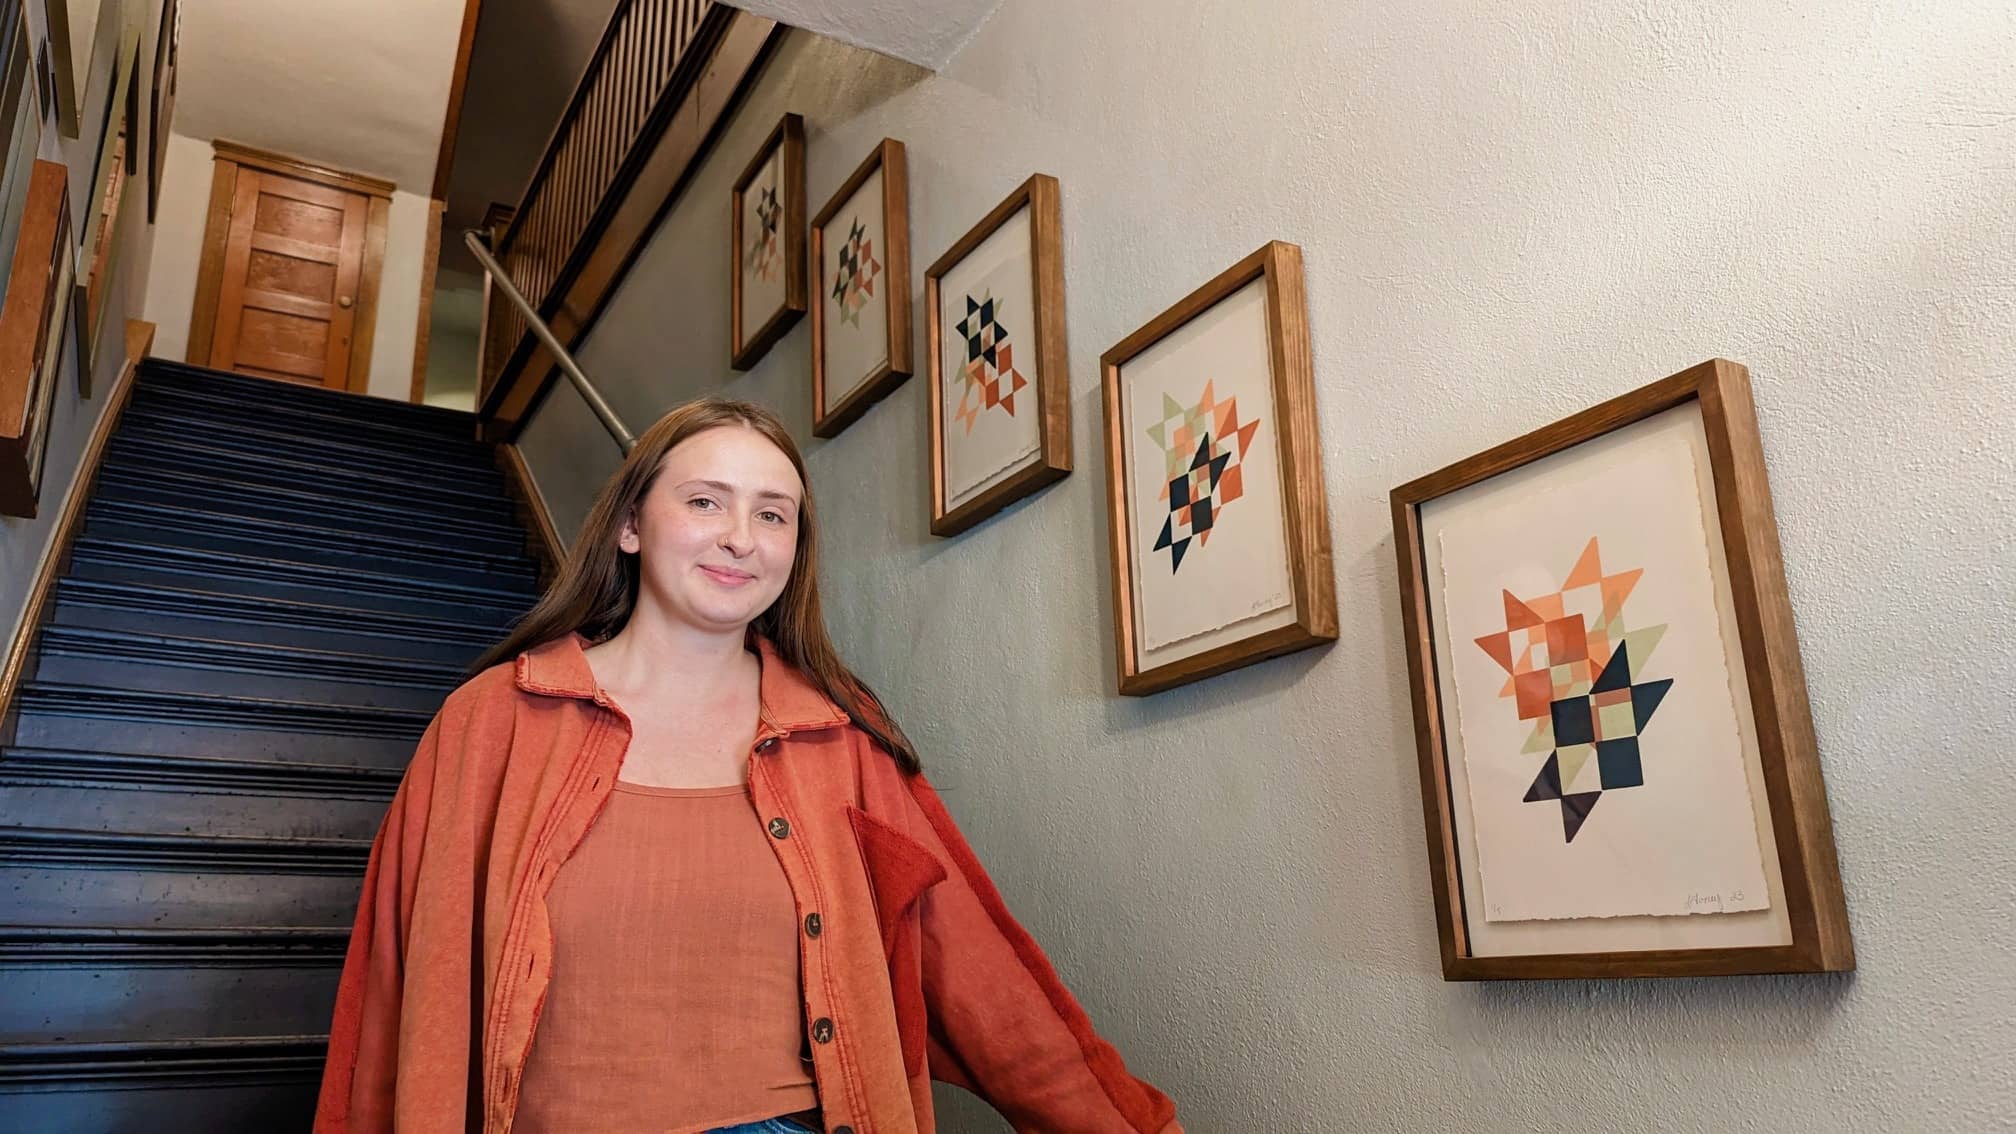 Lindsay Toney at Lafayette Flats beside "Welcoming Star," her series of screen prints based on the star quilting pattern.